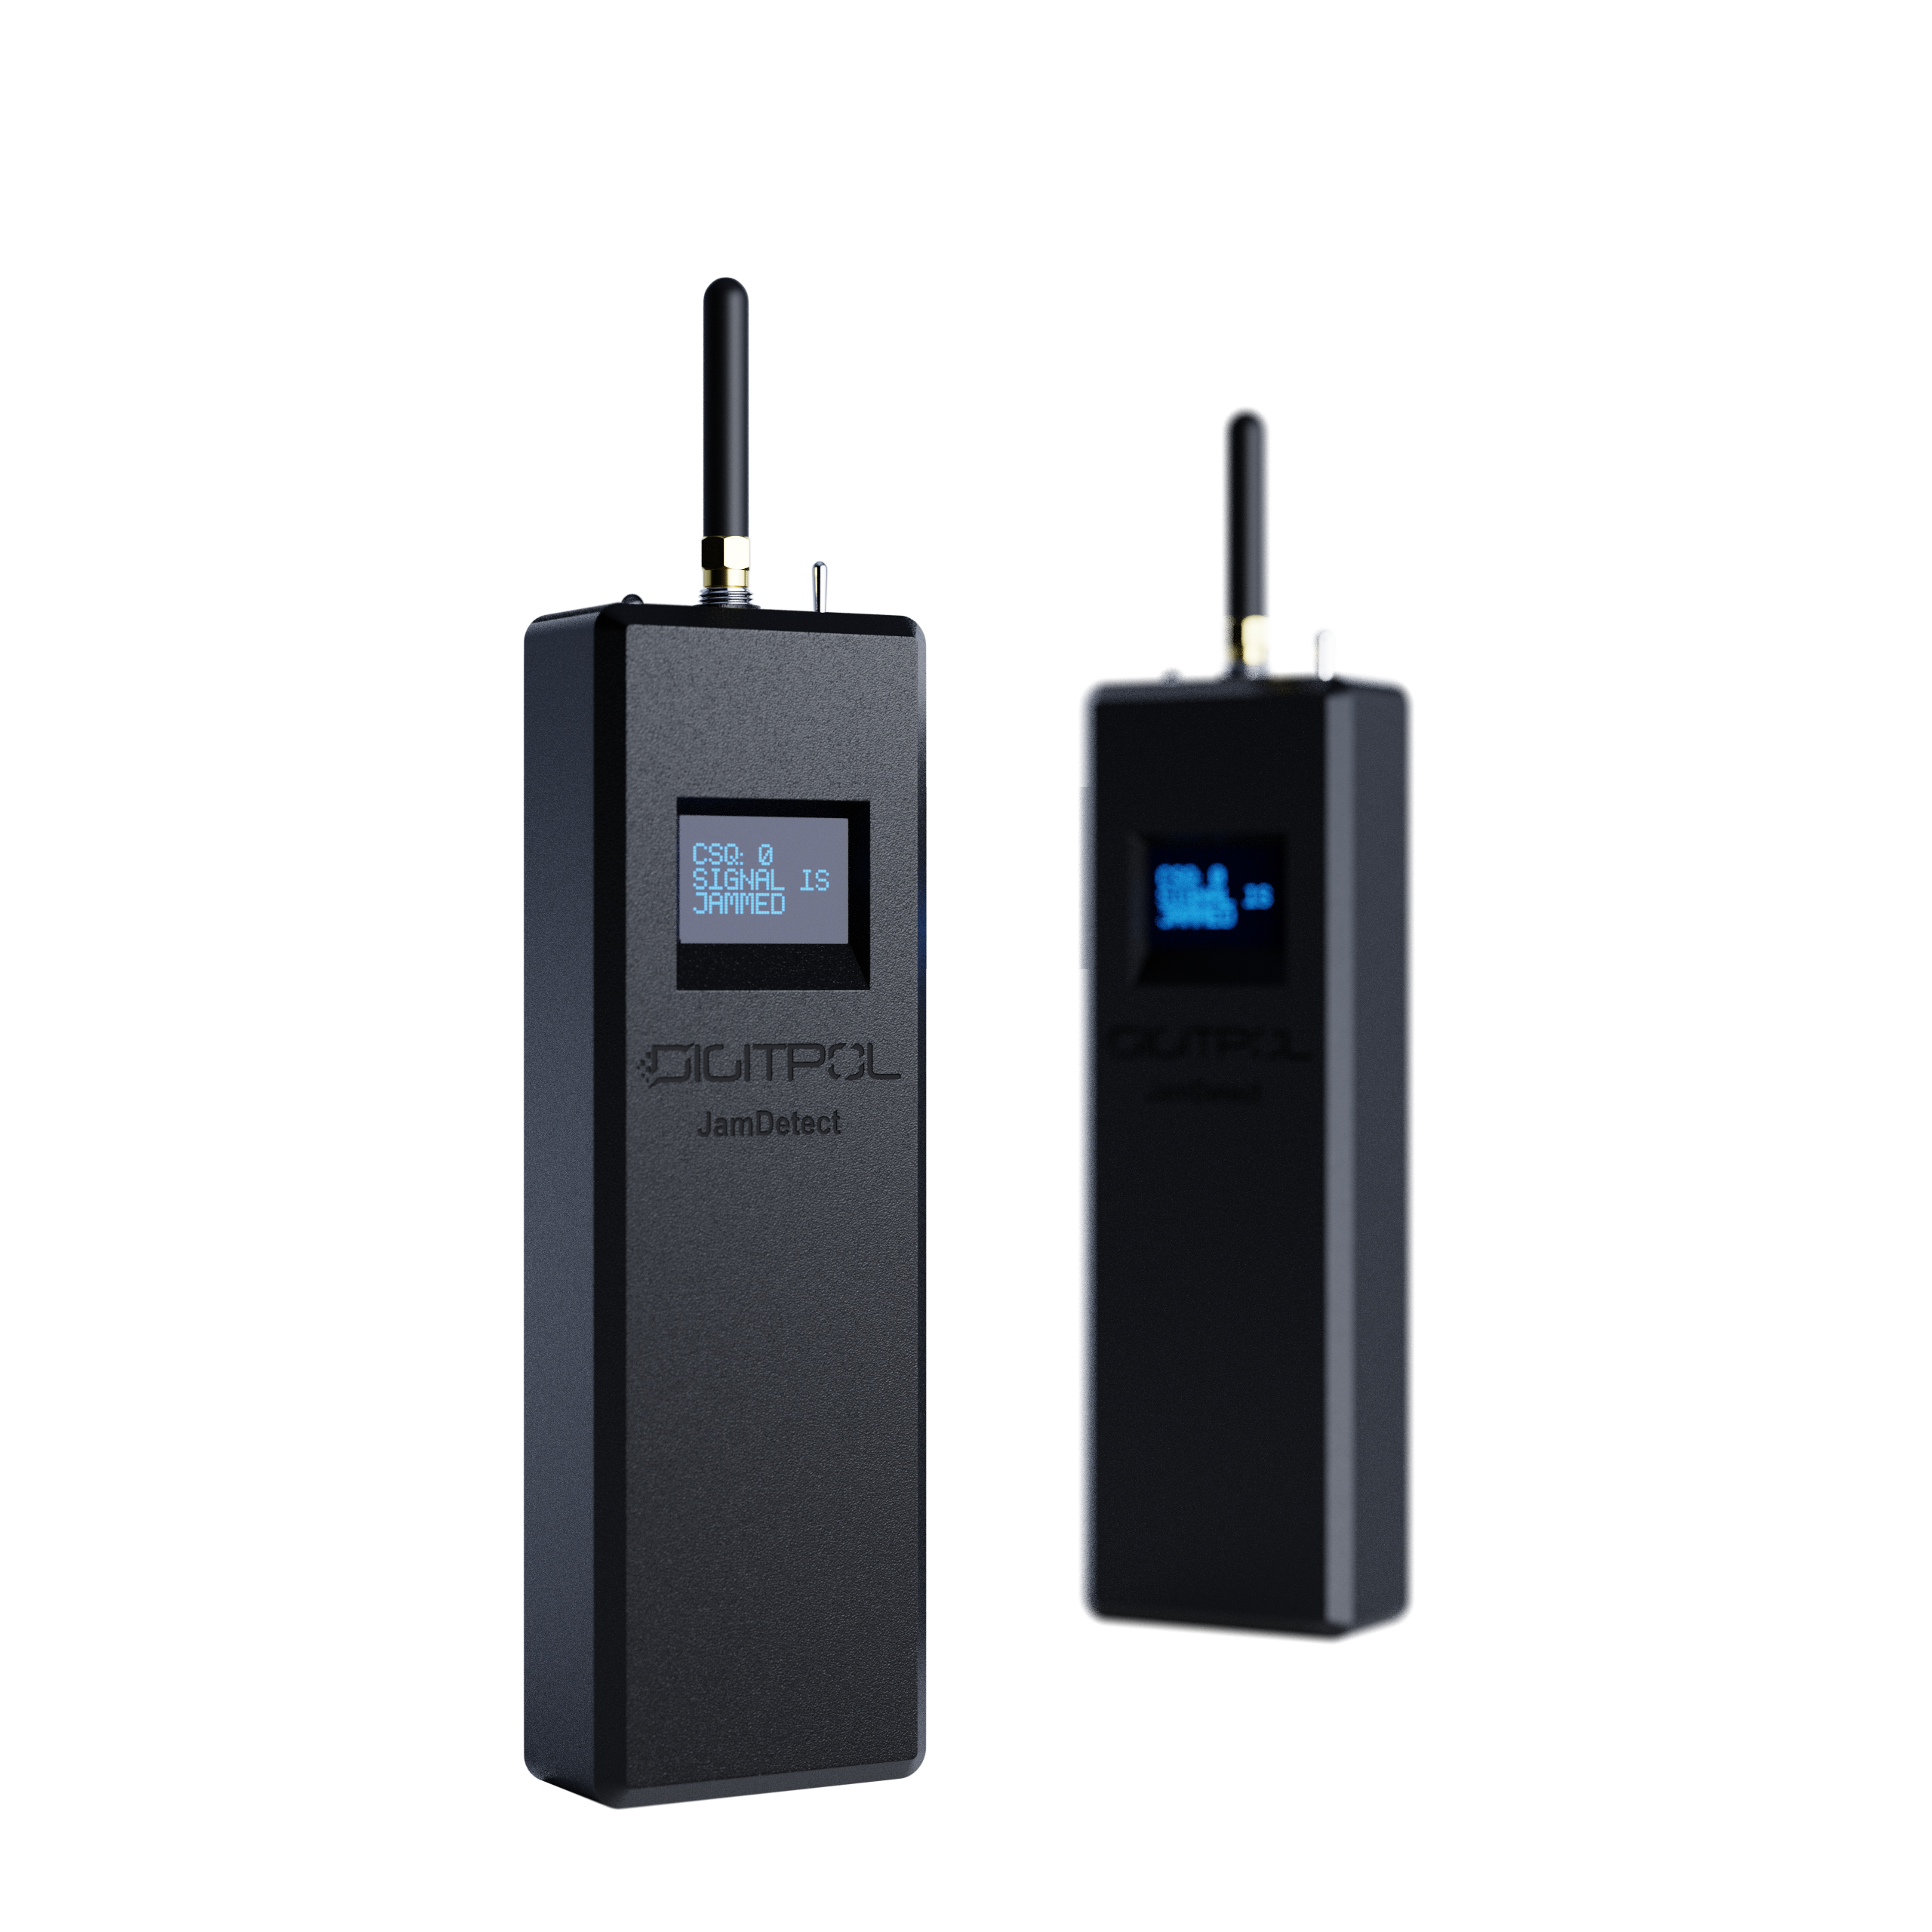 Digitpol develops a 5G Signal Jammer Detector For Law Enforcement To Detect Illegal Cell Blockers